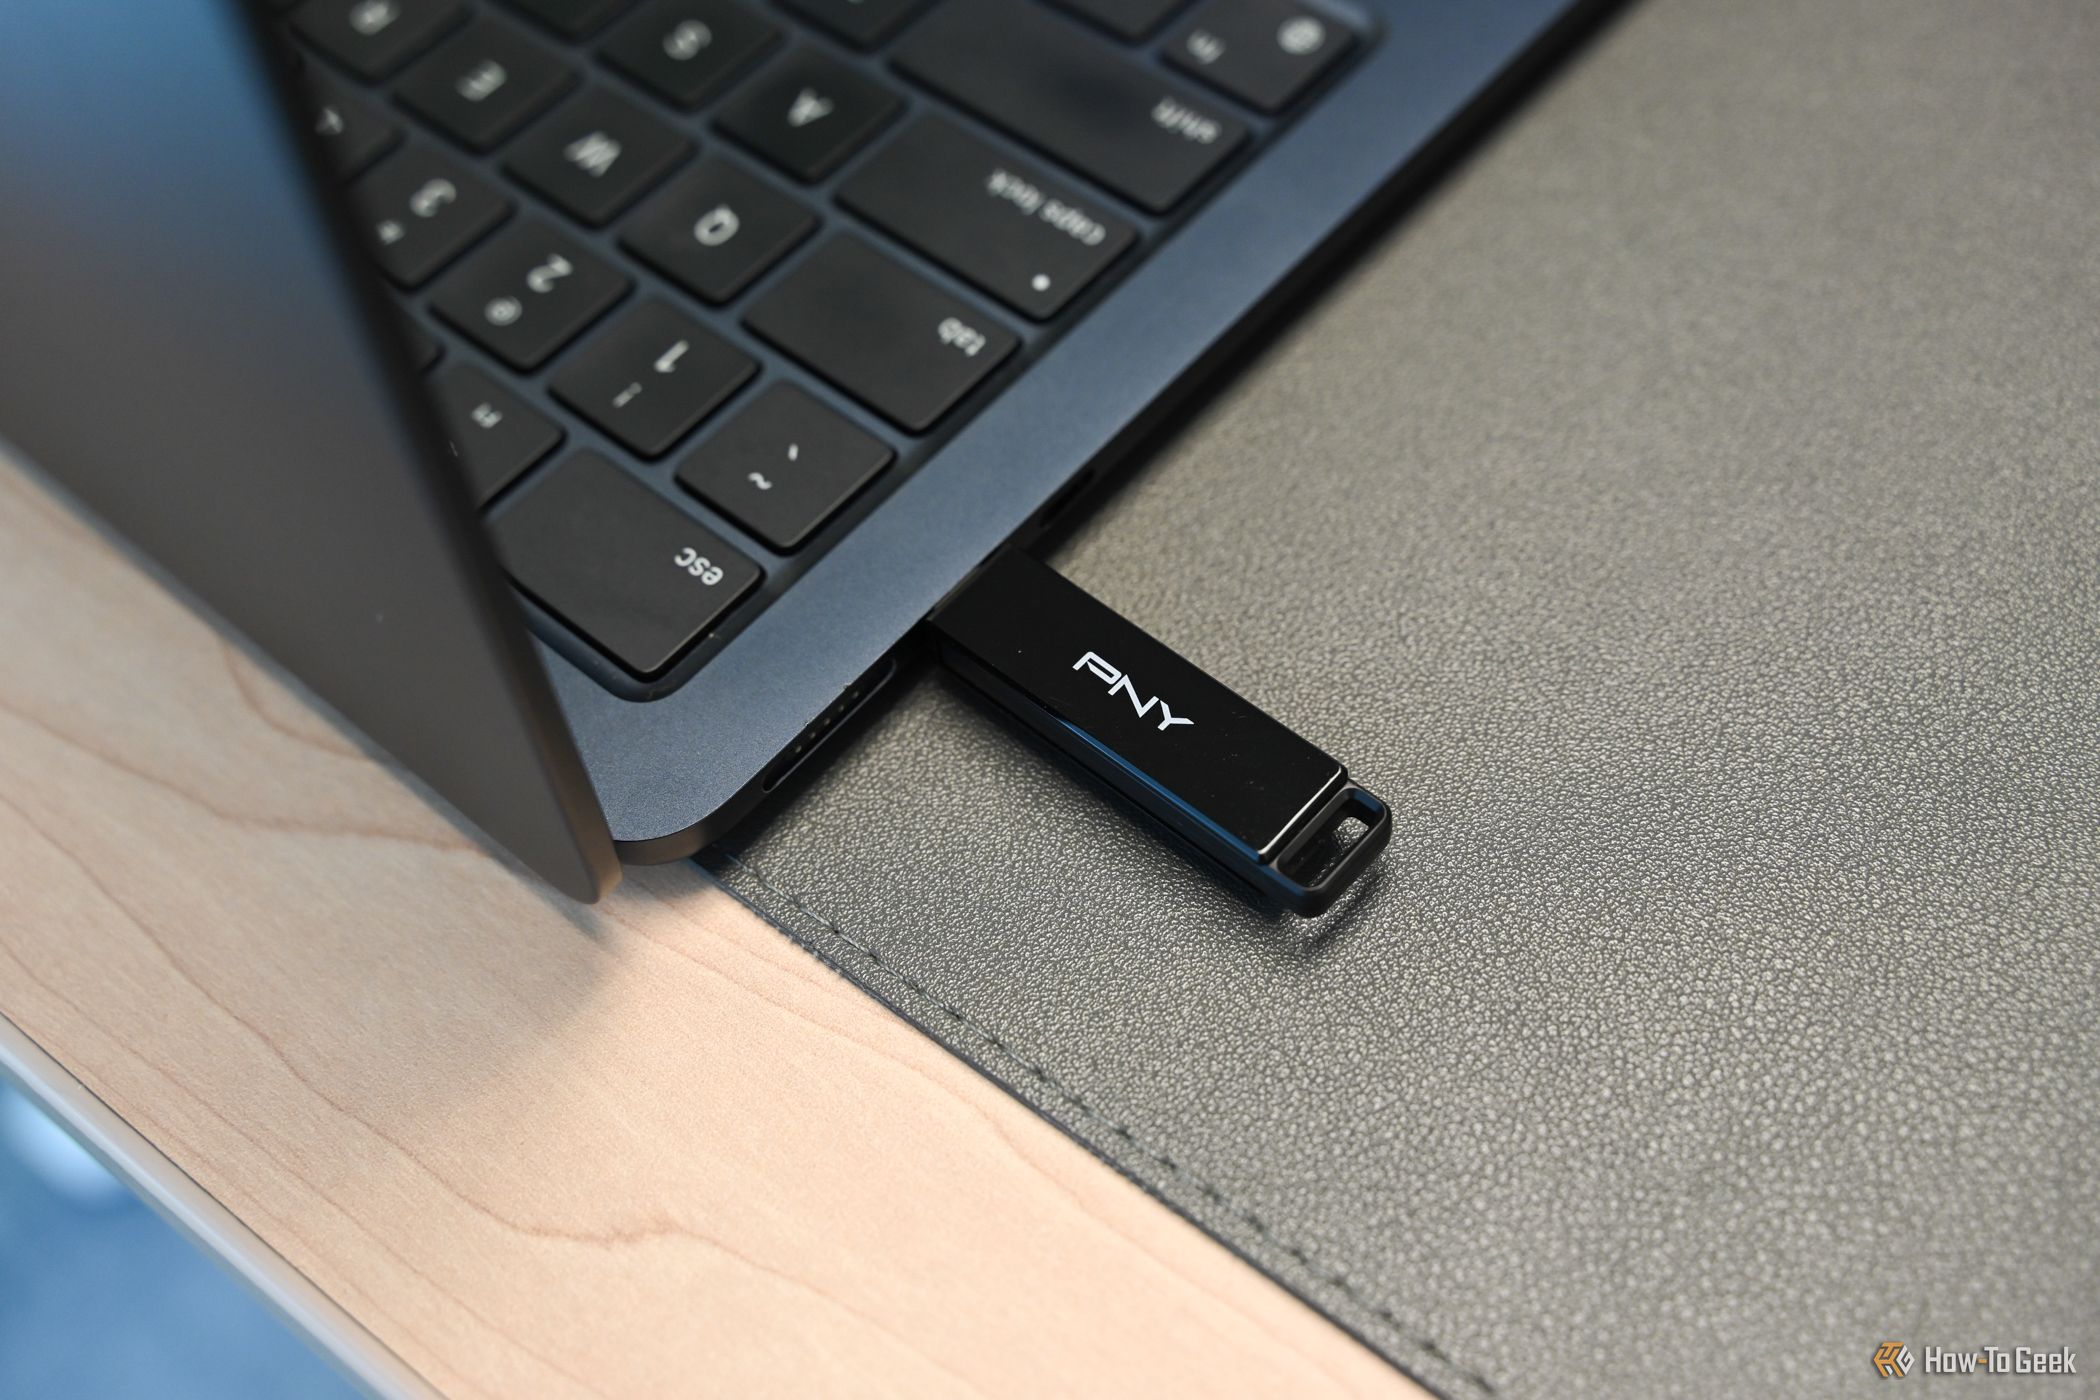 The PNY Elite-X Type C Flash Drive plugged into a laptop